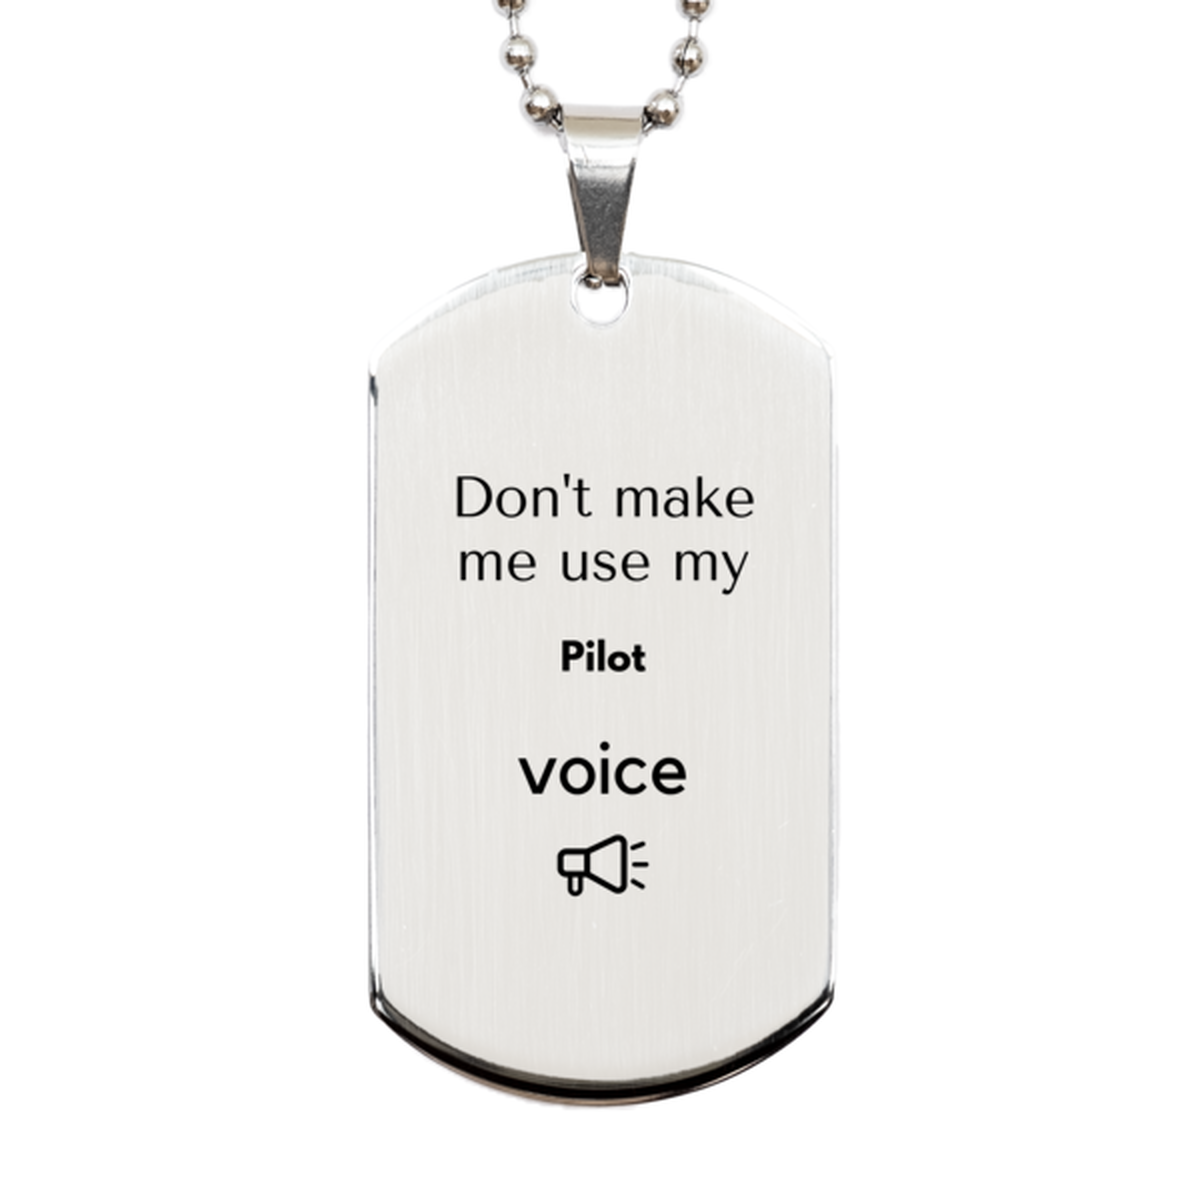 Don't make me use my Pilot voice, Sarcasm Pilot Gifts, Christmas Pilot Silver Dog Tag Birthday Unique Gifts For Pilot Coworkers, Men, Women, Colleague, Friends